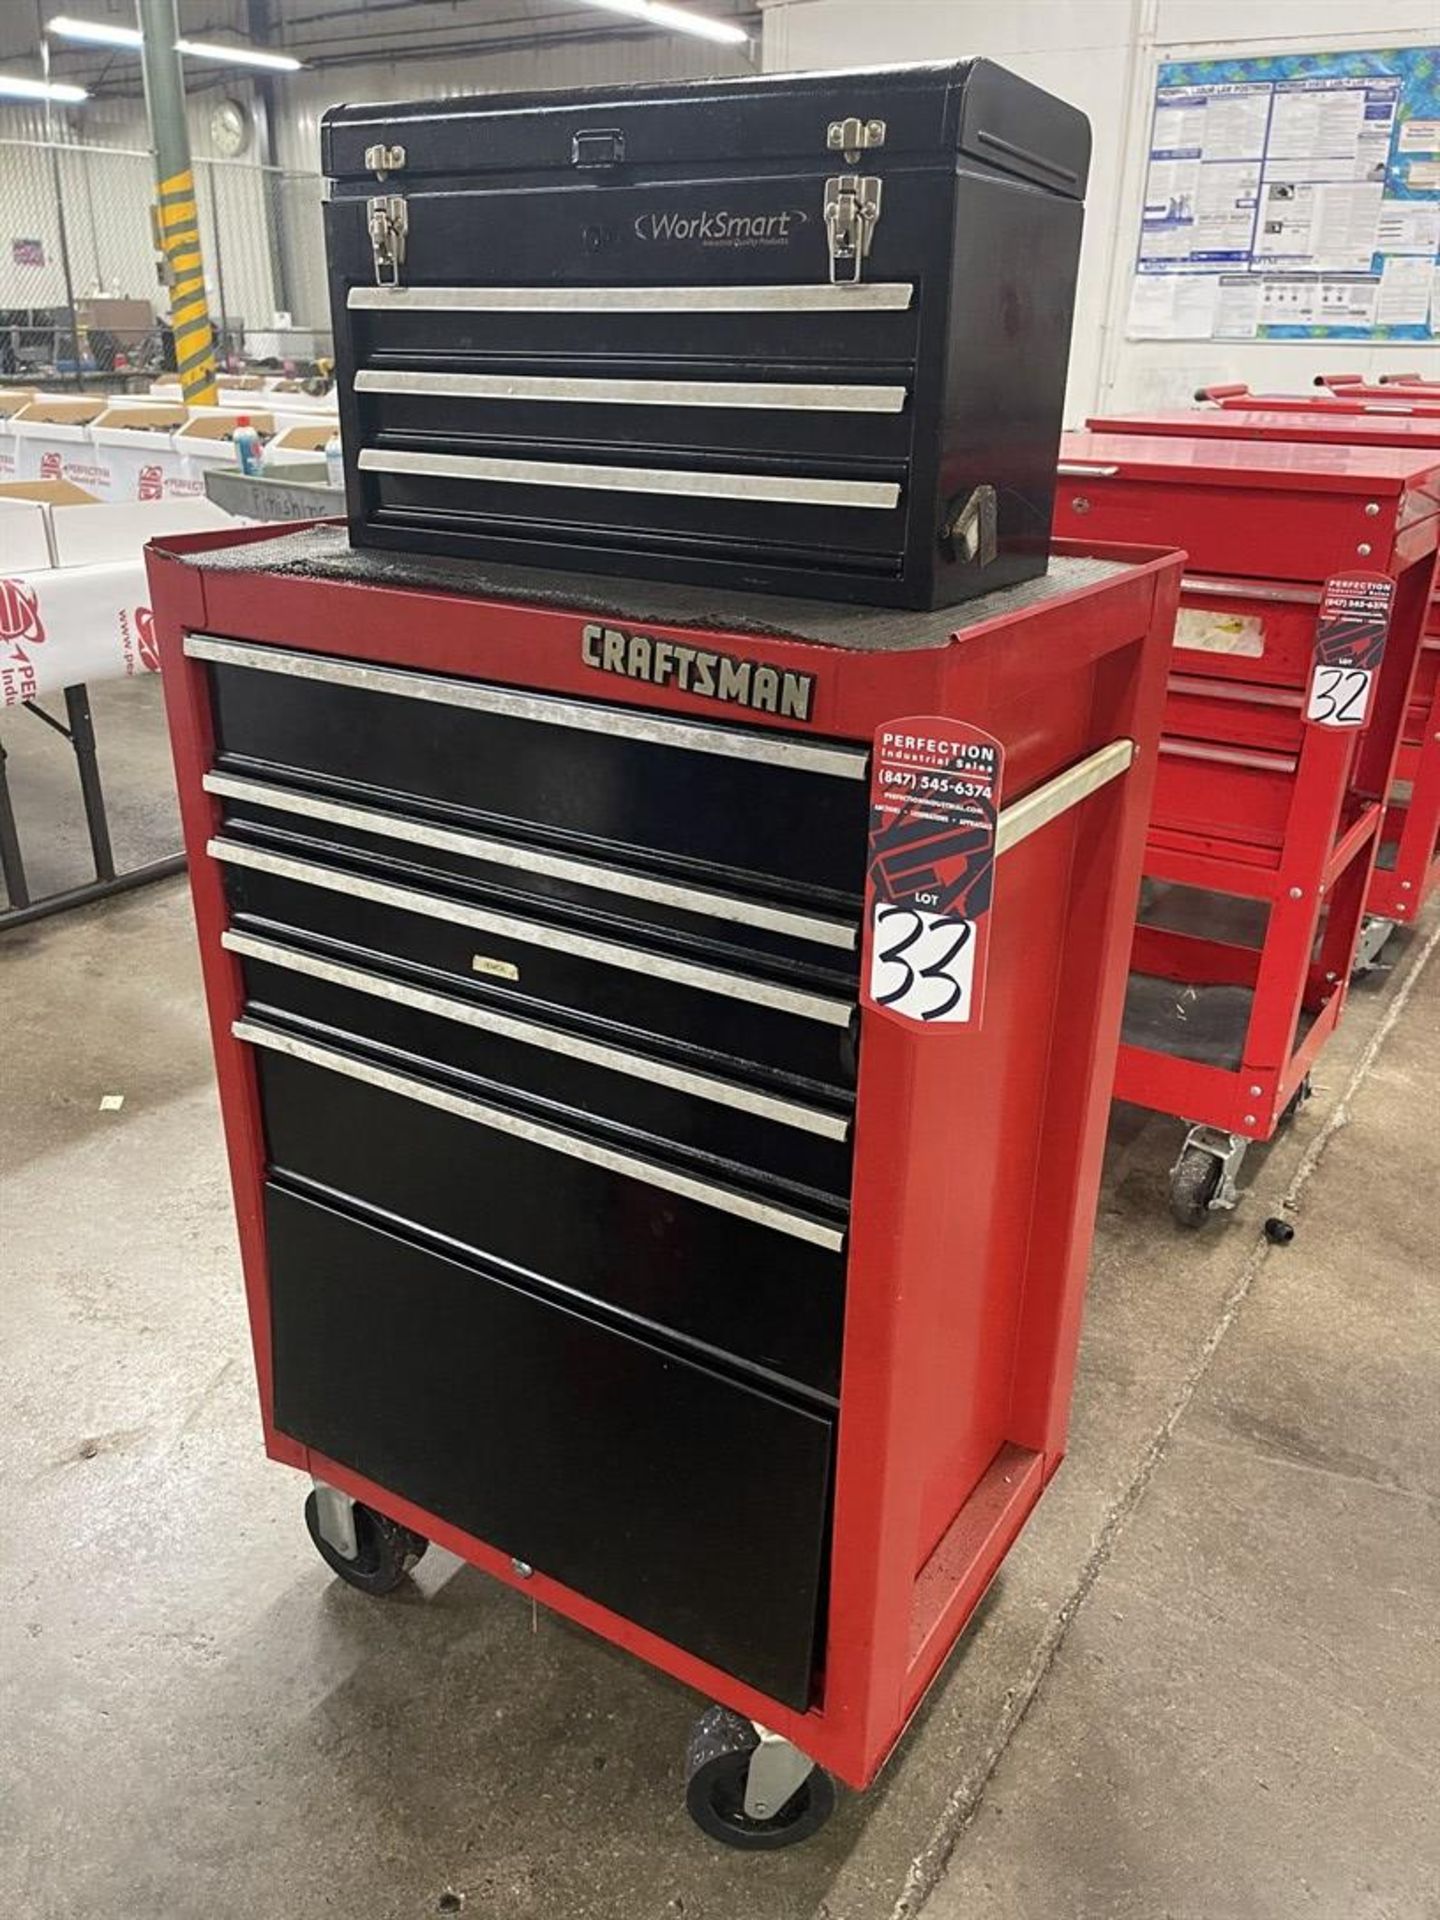 CRAFTSMAN Rolling Tool Box w/ Work smart Hand Carry Tool Box